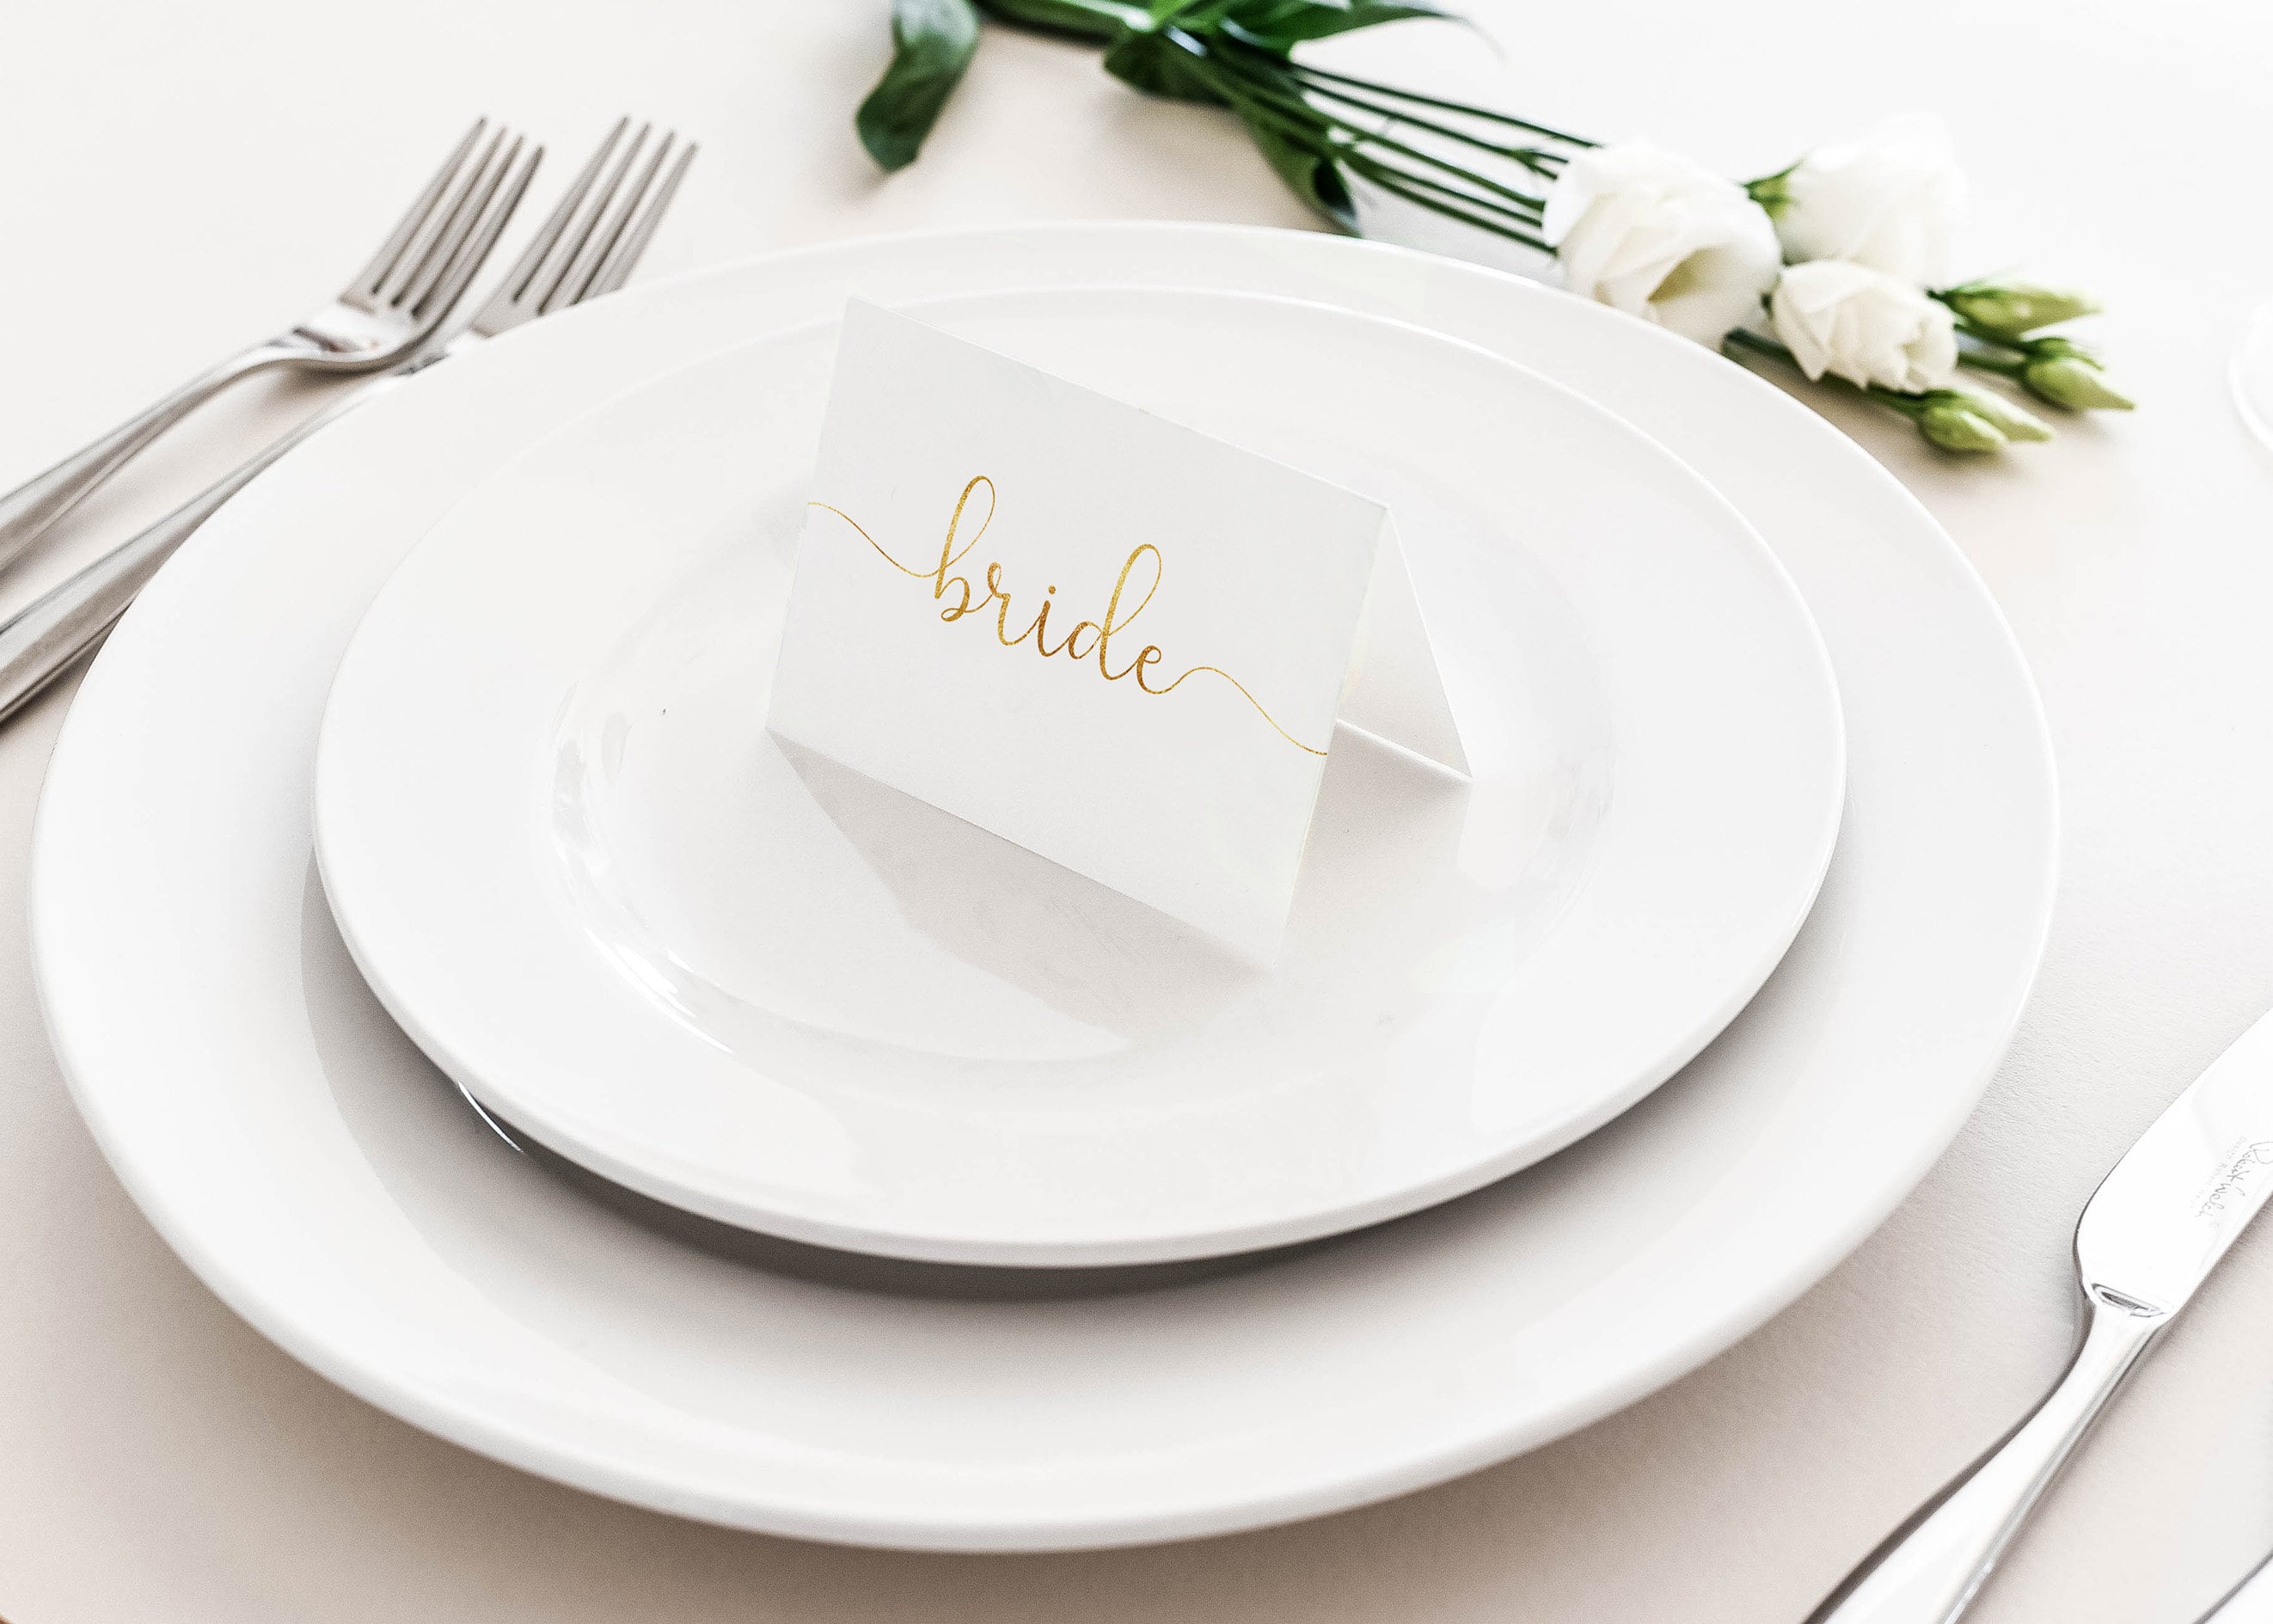 Gold Foil Wedding Place Cards - Name Calligraphy Style Rose Setting